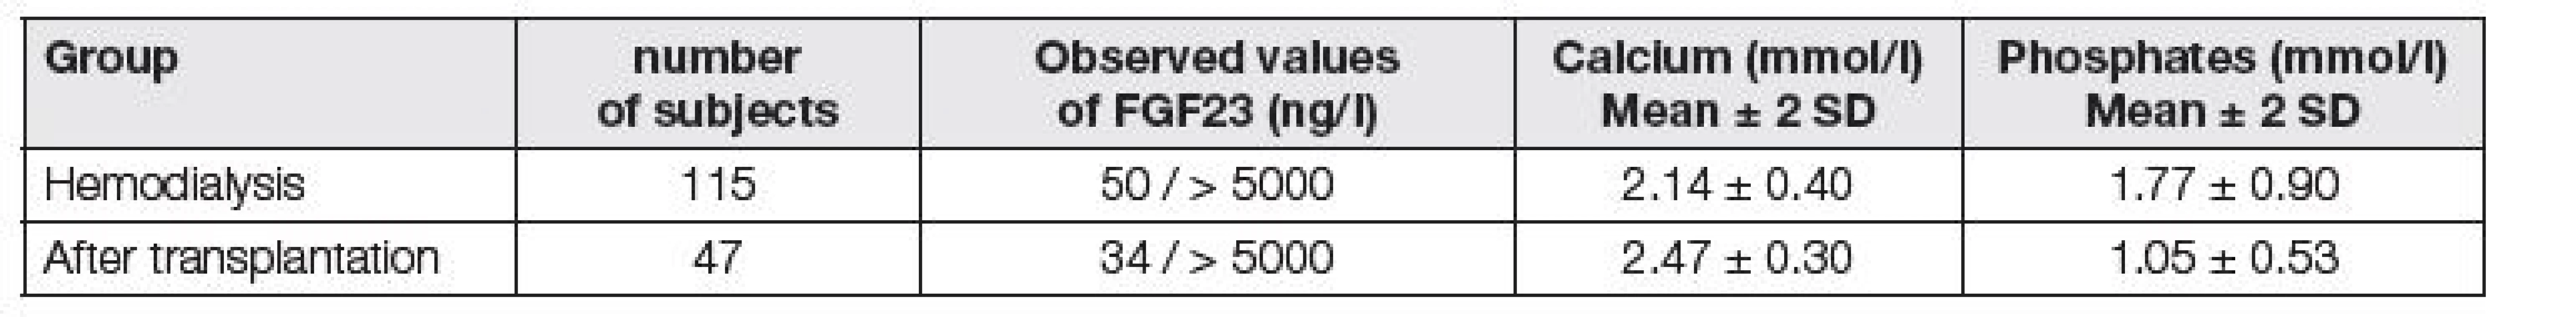 Typical values of FGF 23 in patients with chronical kidney diseases, obtained by DiaSorin Liaison automated measurement.